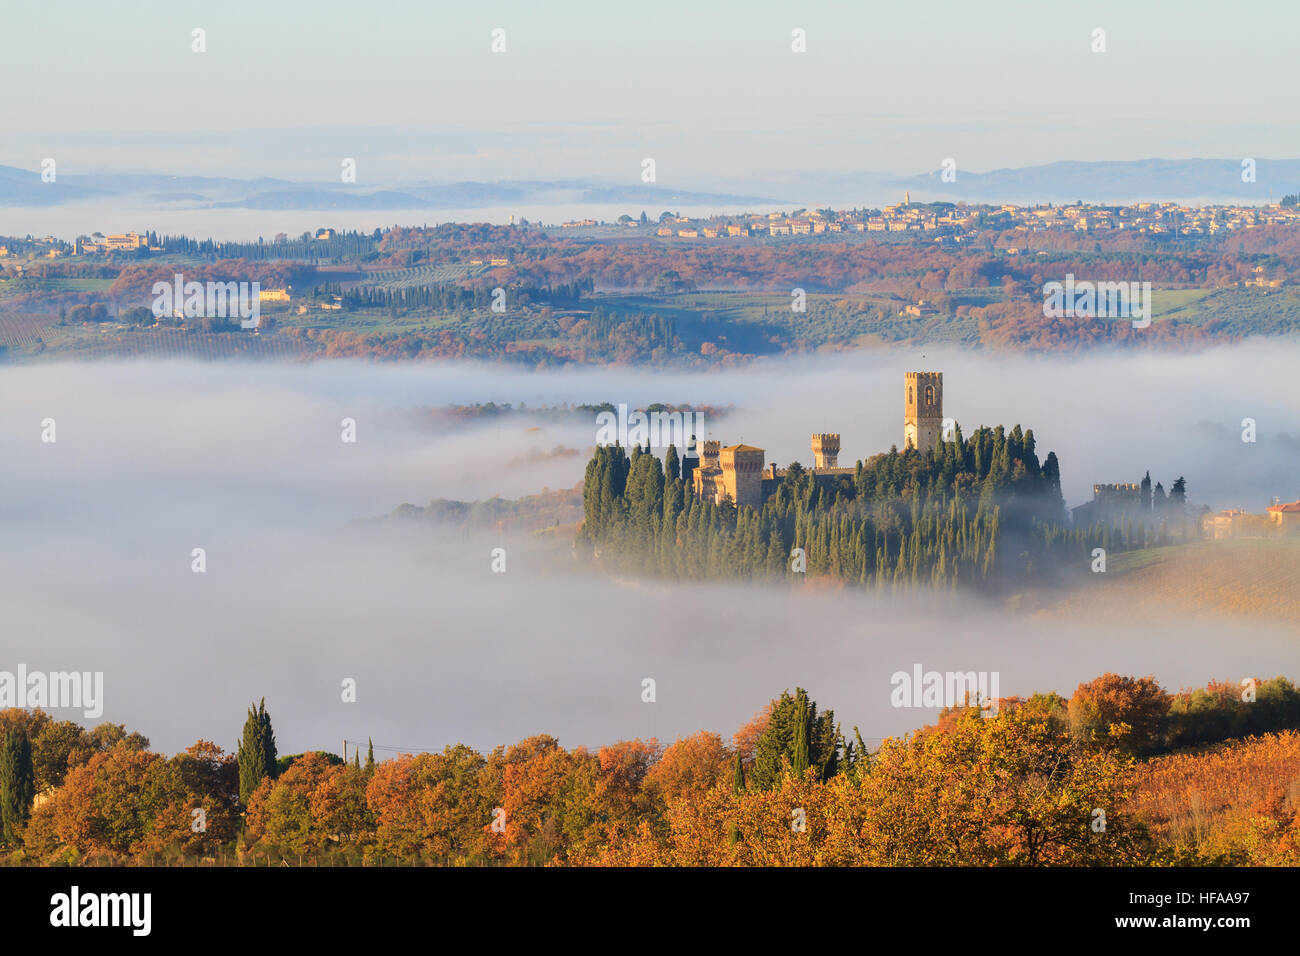 Tavarnelle Val di Pesa, November 2016: Abbey of Passignano and vineyard landscape in autumn with fog, on November 2016 in Tavarnelle Val di Pesa, Ital Stock Photo